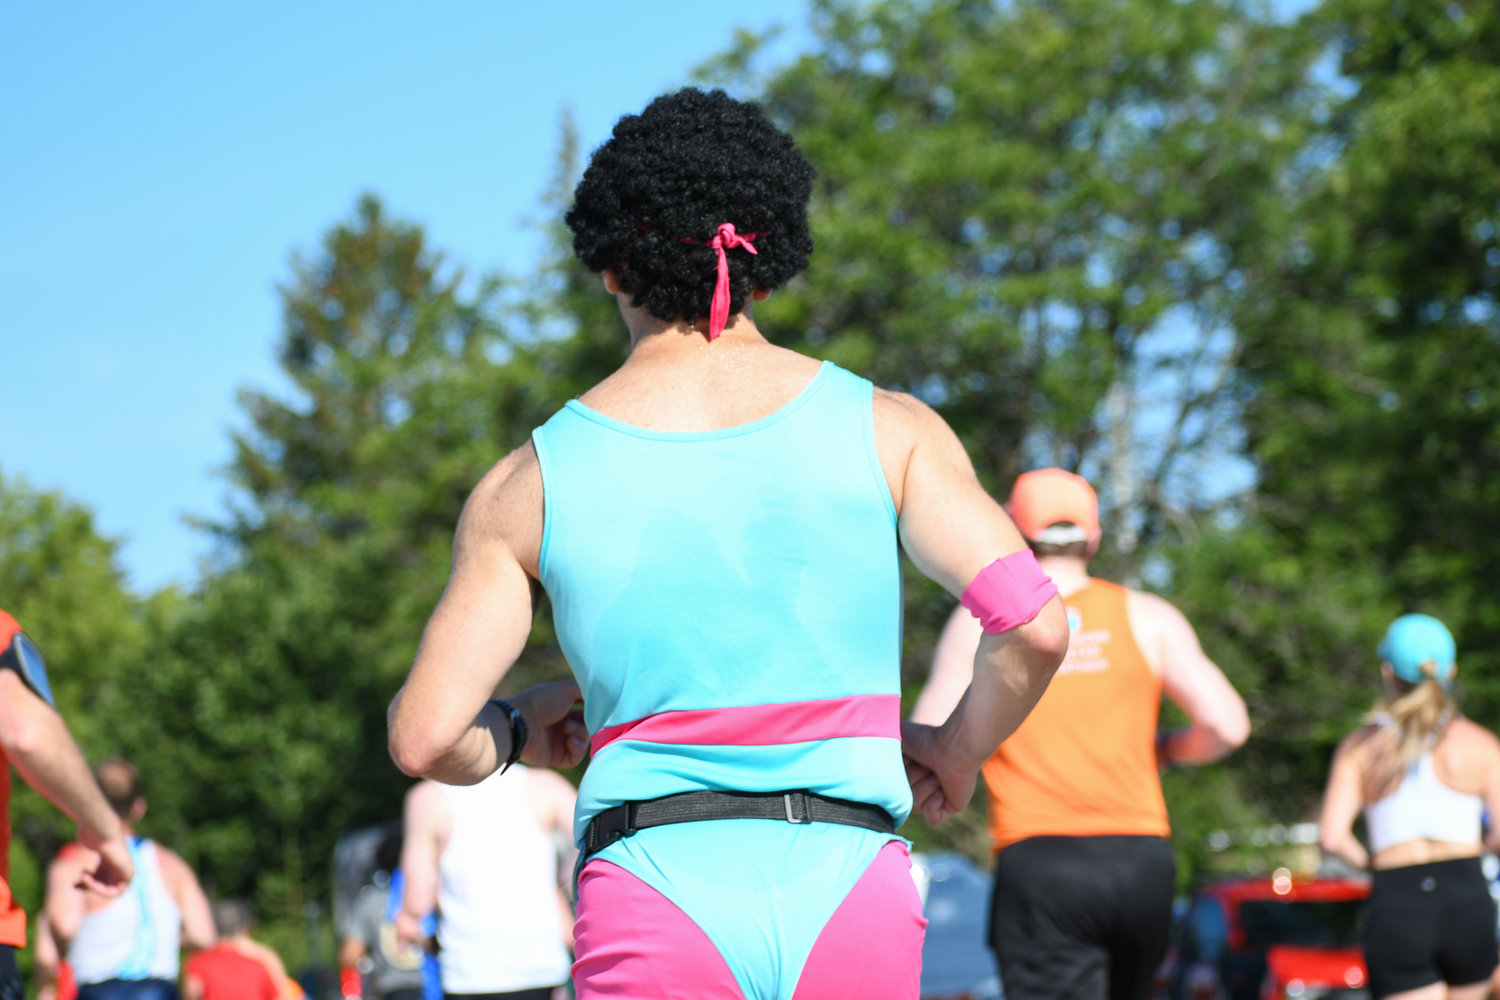 While some runners chose traditional attire to race in the 2022 Boilermaker, others added a creative flair to their athletic uniform.